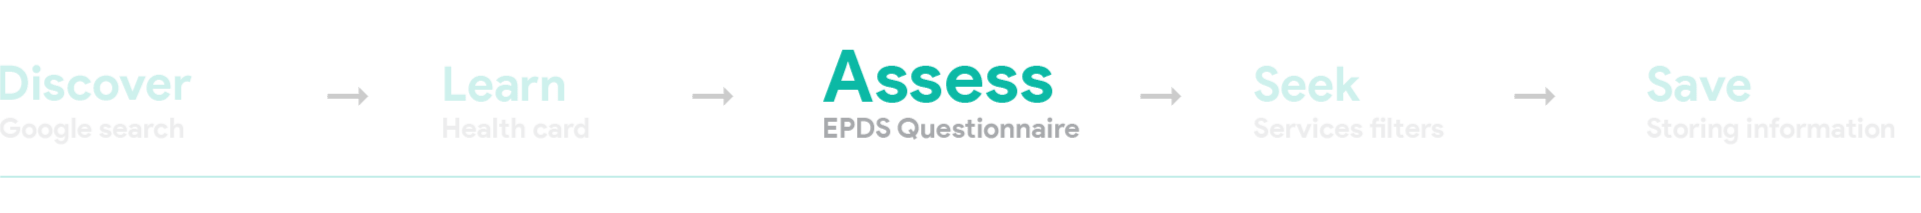 product overview - assess